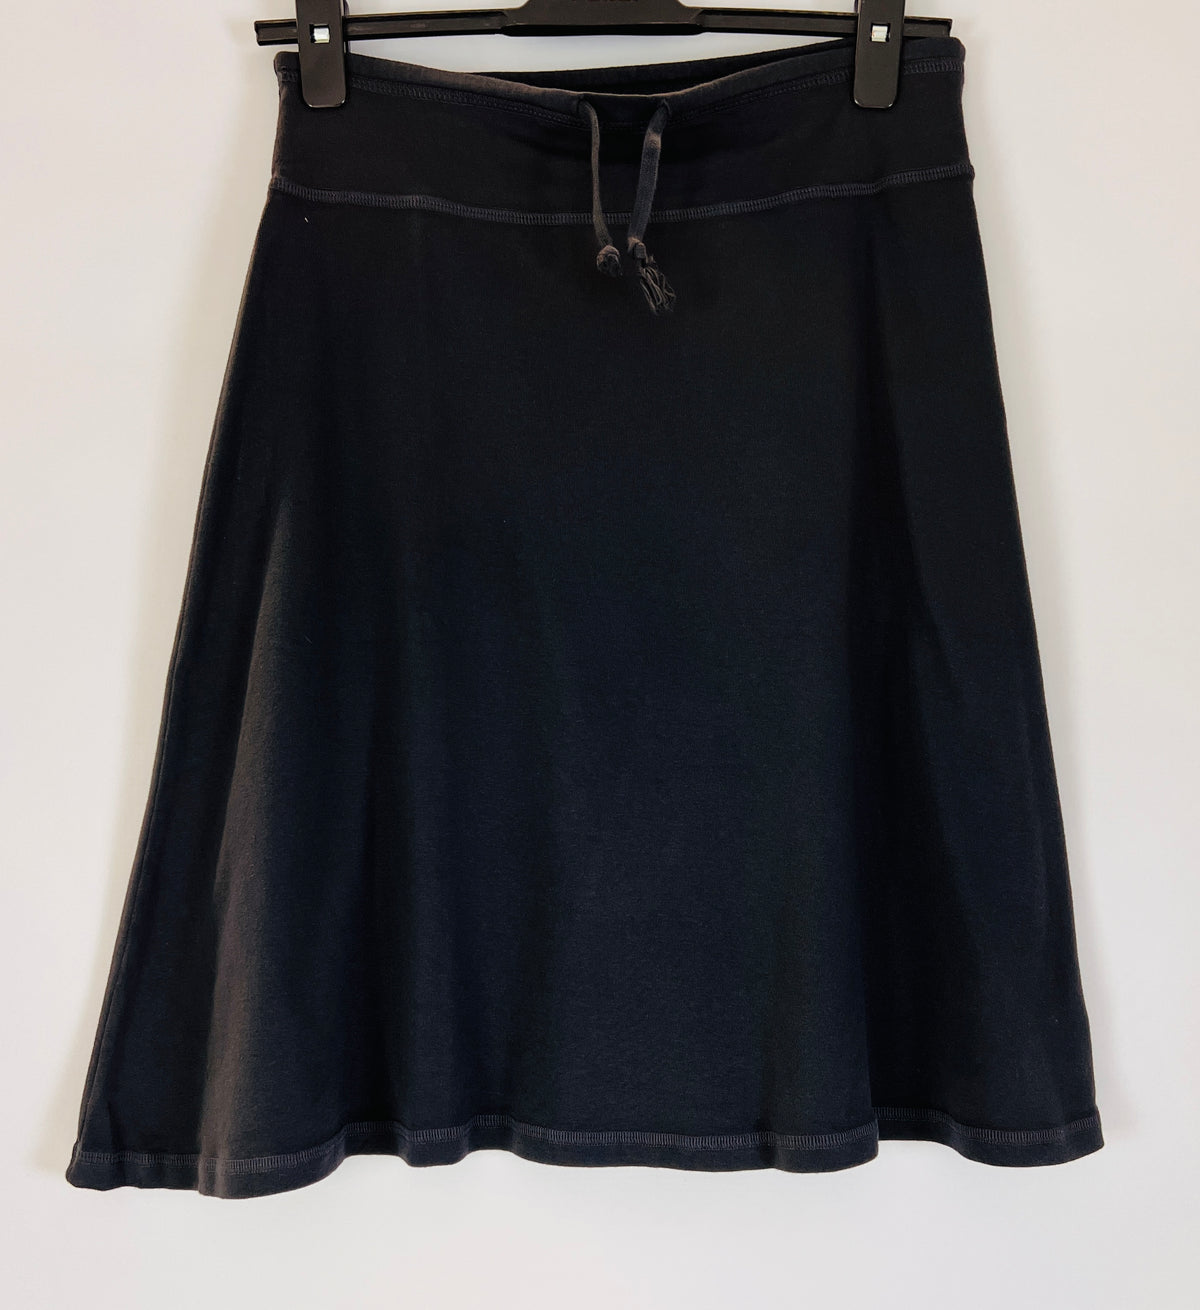 Black Cotton pull-on stretch skirt with adjustable drawstring tie waist and soft A-Line silhouette.